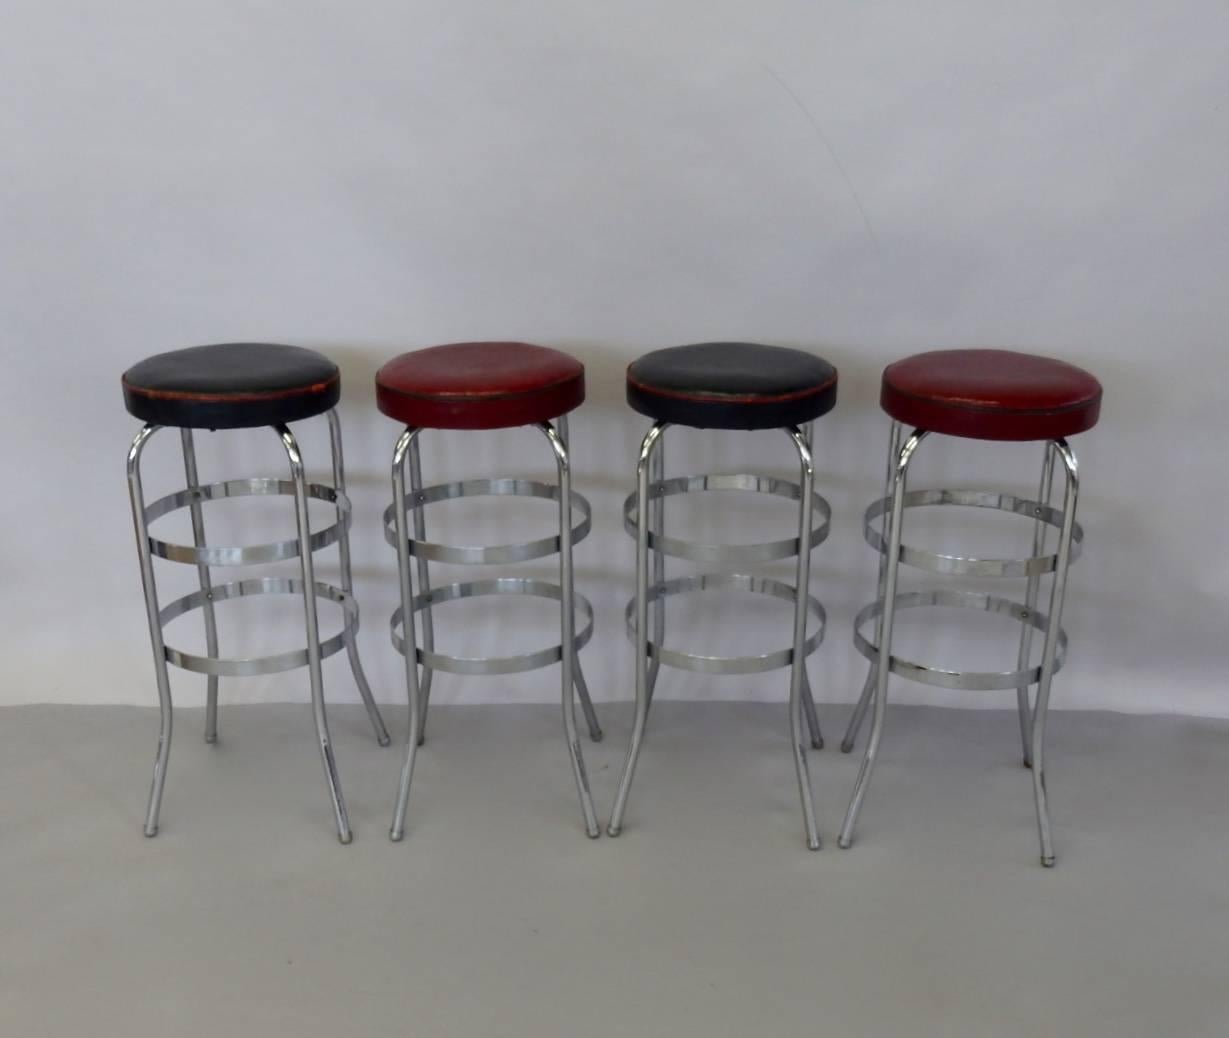 Four Lloyd chrome bar stools attributed to KEM Weber. Tubular steel legs connected with flat 